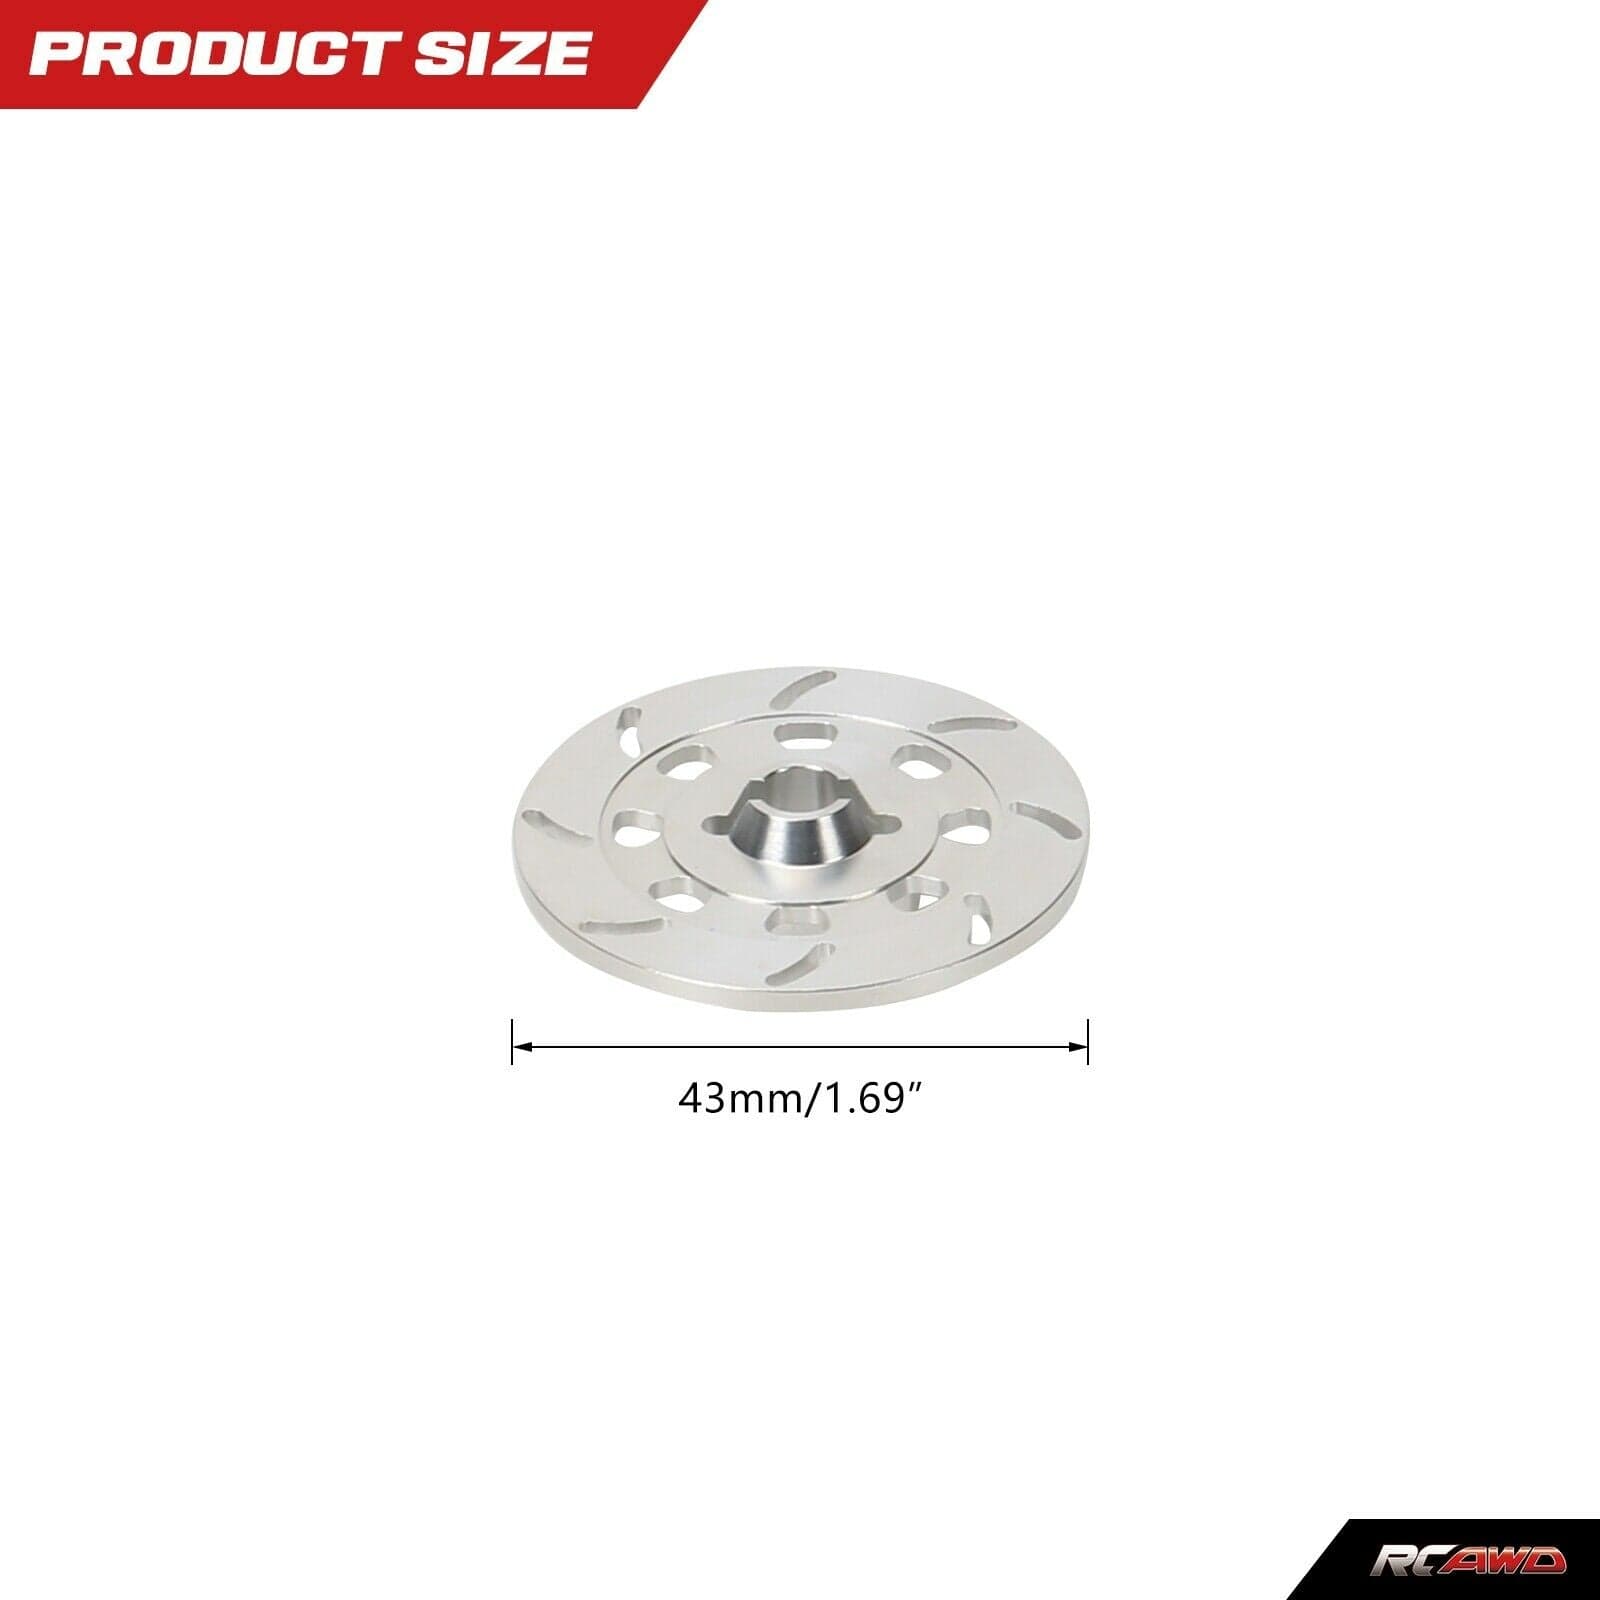 RCAWD Traxxas UDR Unlimited Desert Racer Wheel Disc Brake Rotors 8569 - RCAWD